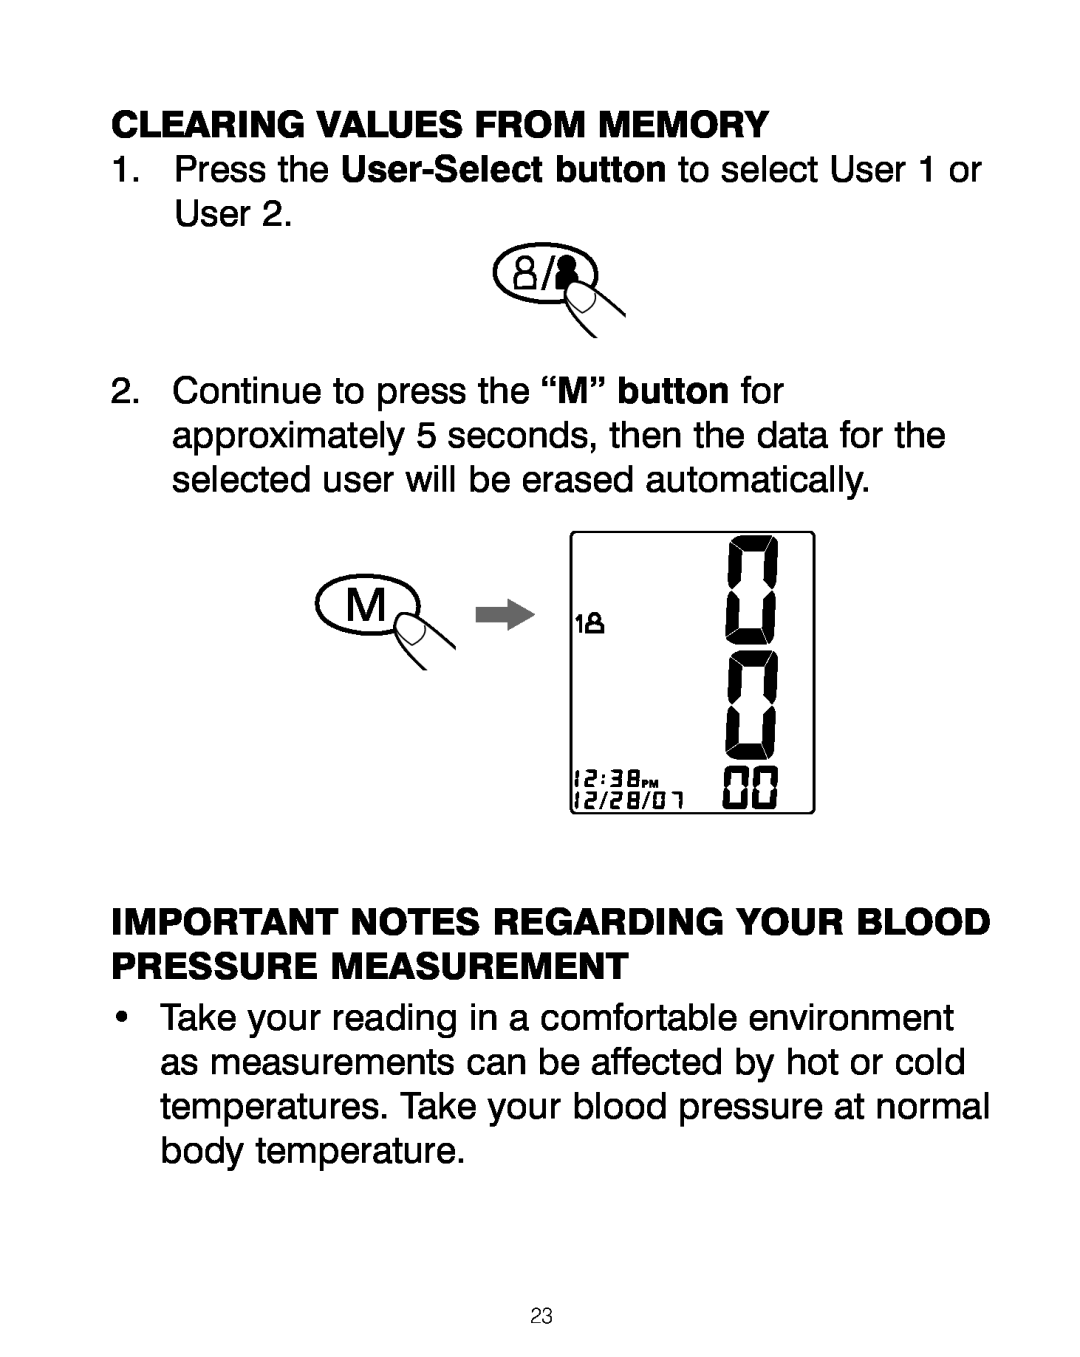 HoMedics BPA-200 manual Clearing Values From Memory, Important Notes Regarding Your Blood Pressure Measurement 